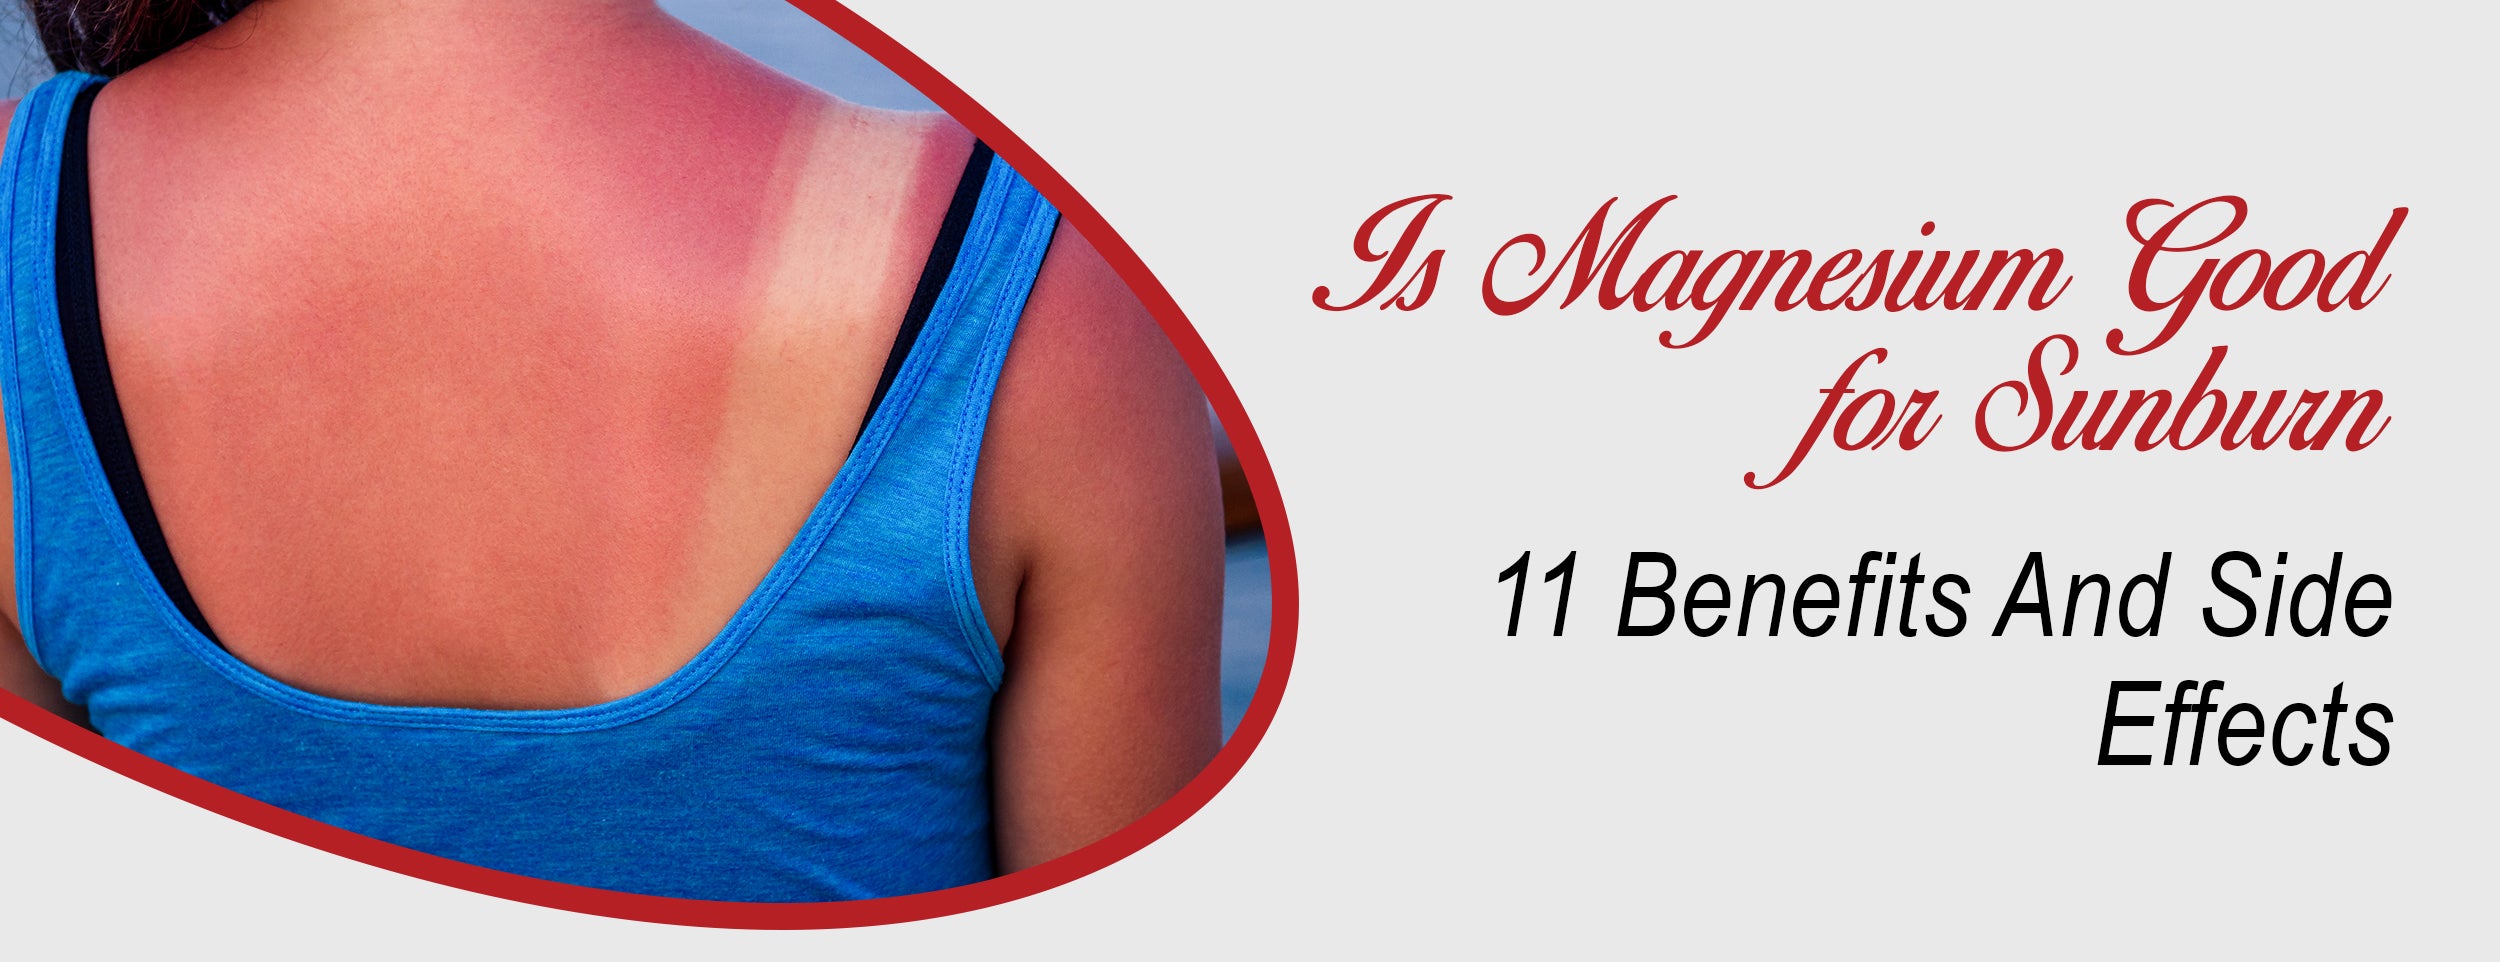 The Benefits & Side Effects of Magnesium for Sunburn